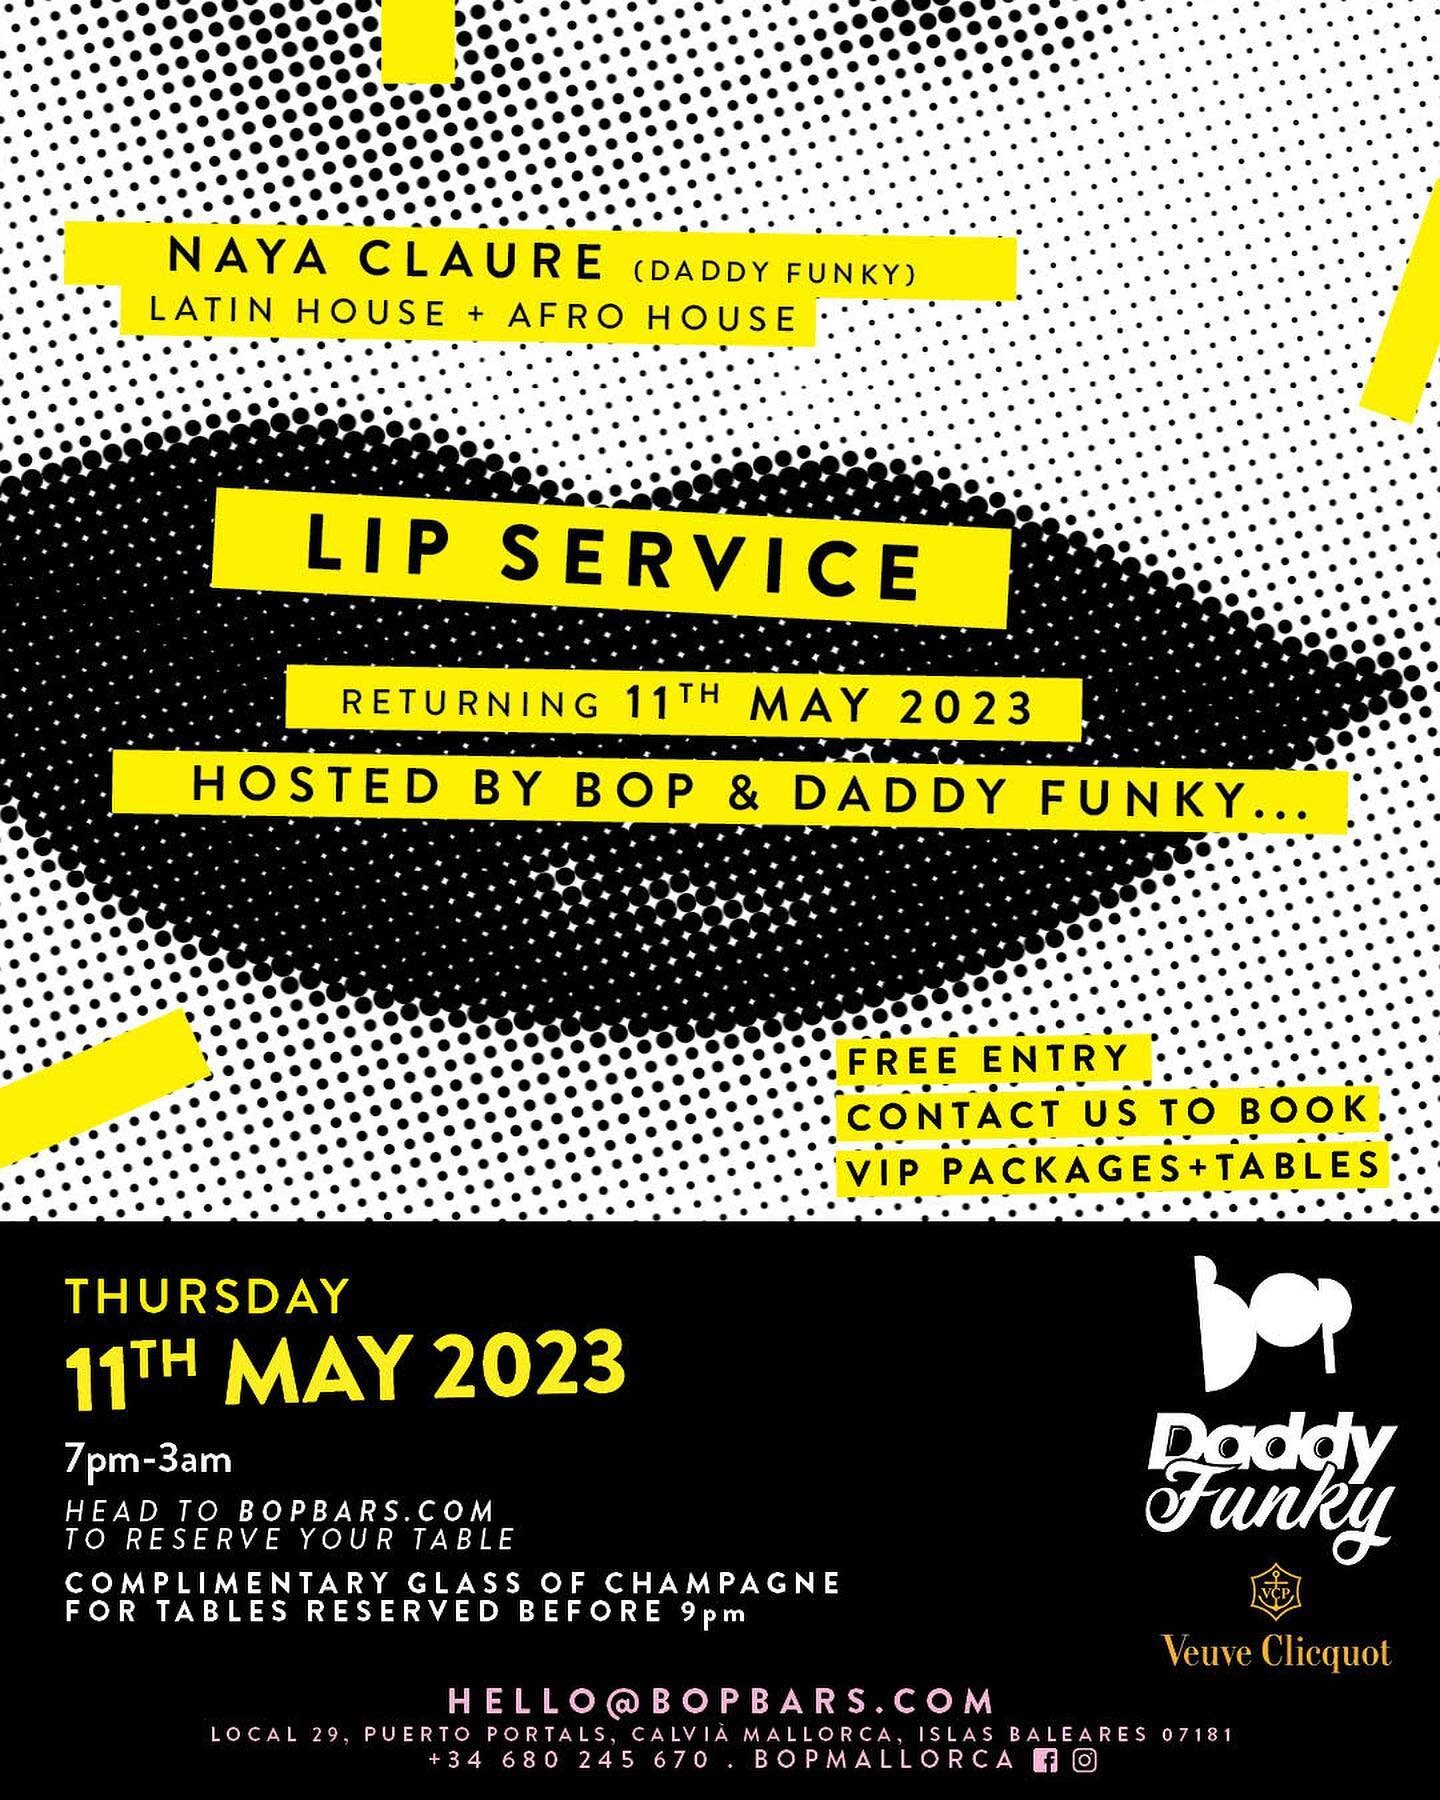 Lip Service is back this Thursday!

Join us for our first Lip Service event since 2019 💋

To bring back one of our most fun and iconic nights we have partnered with @daddyfunkyagency who will be bringing us the best DJs on the island weekly! 

This 